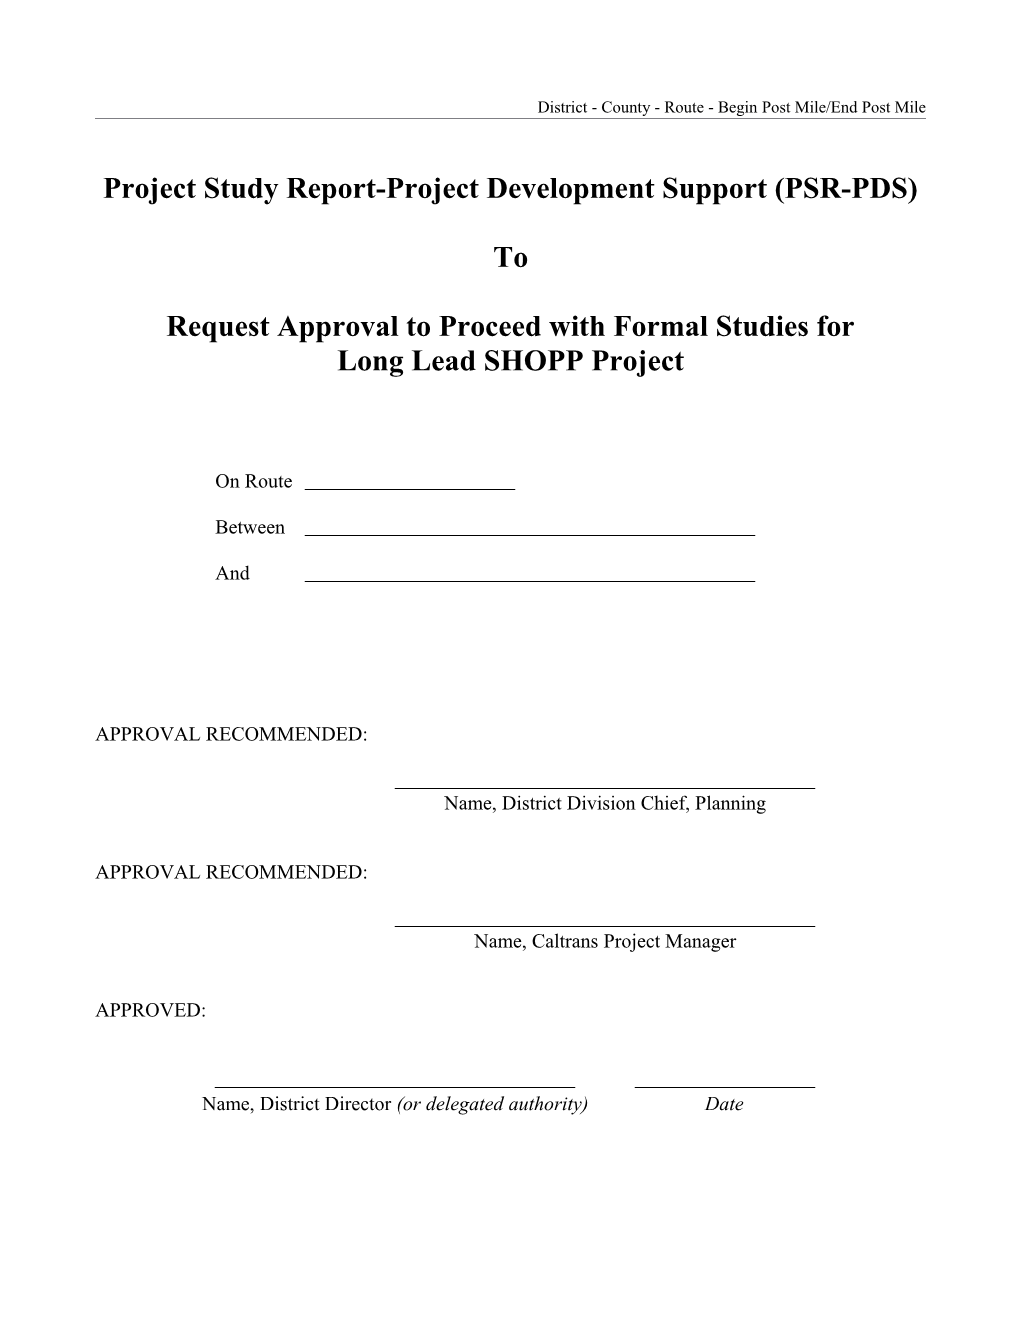 Project Study Report-Project Development Support (PSR-PDS)